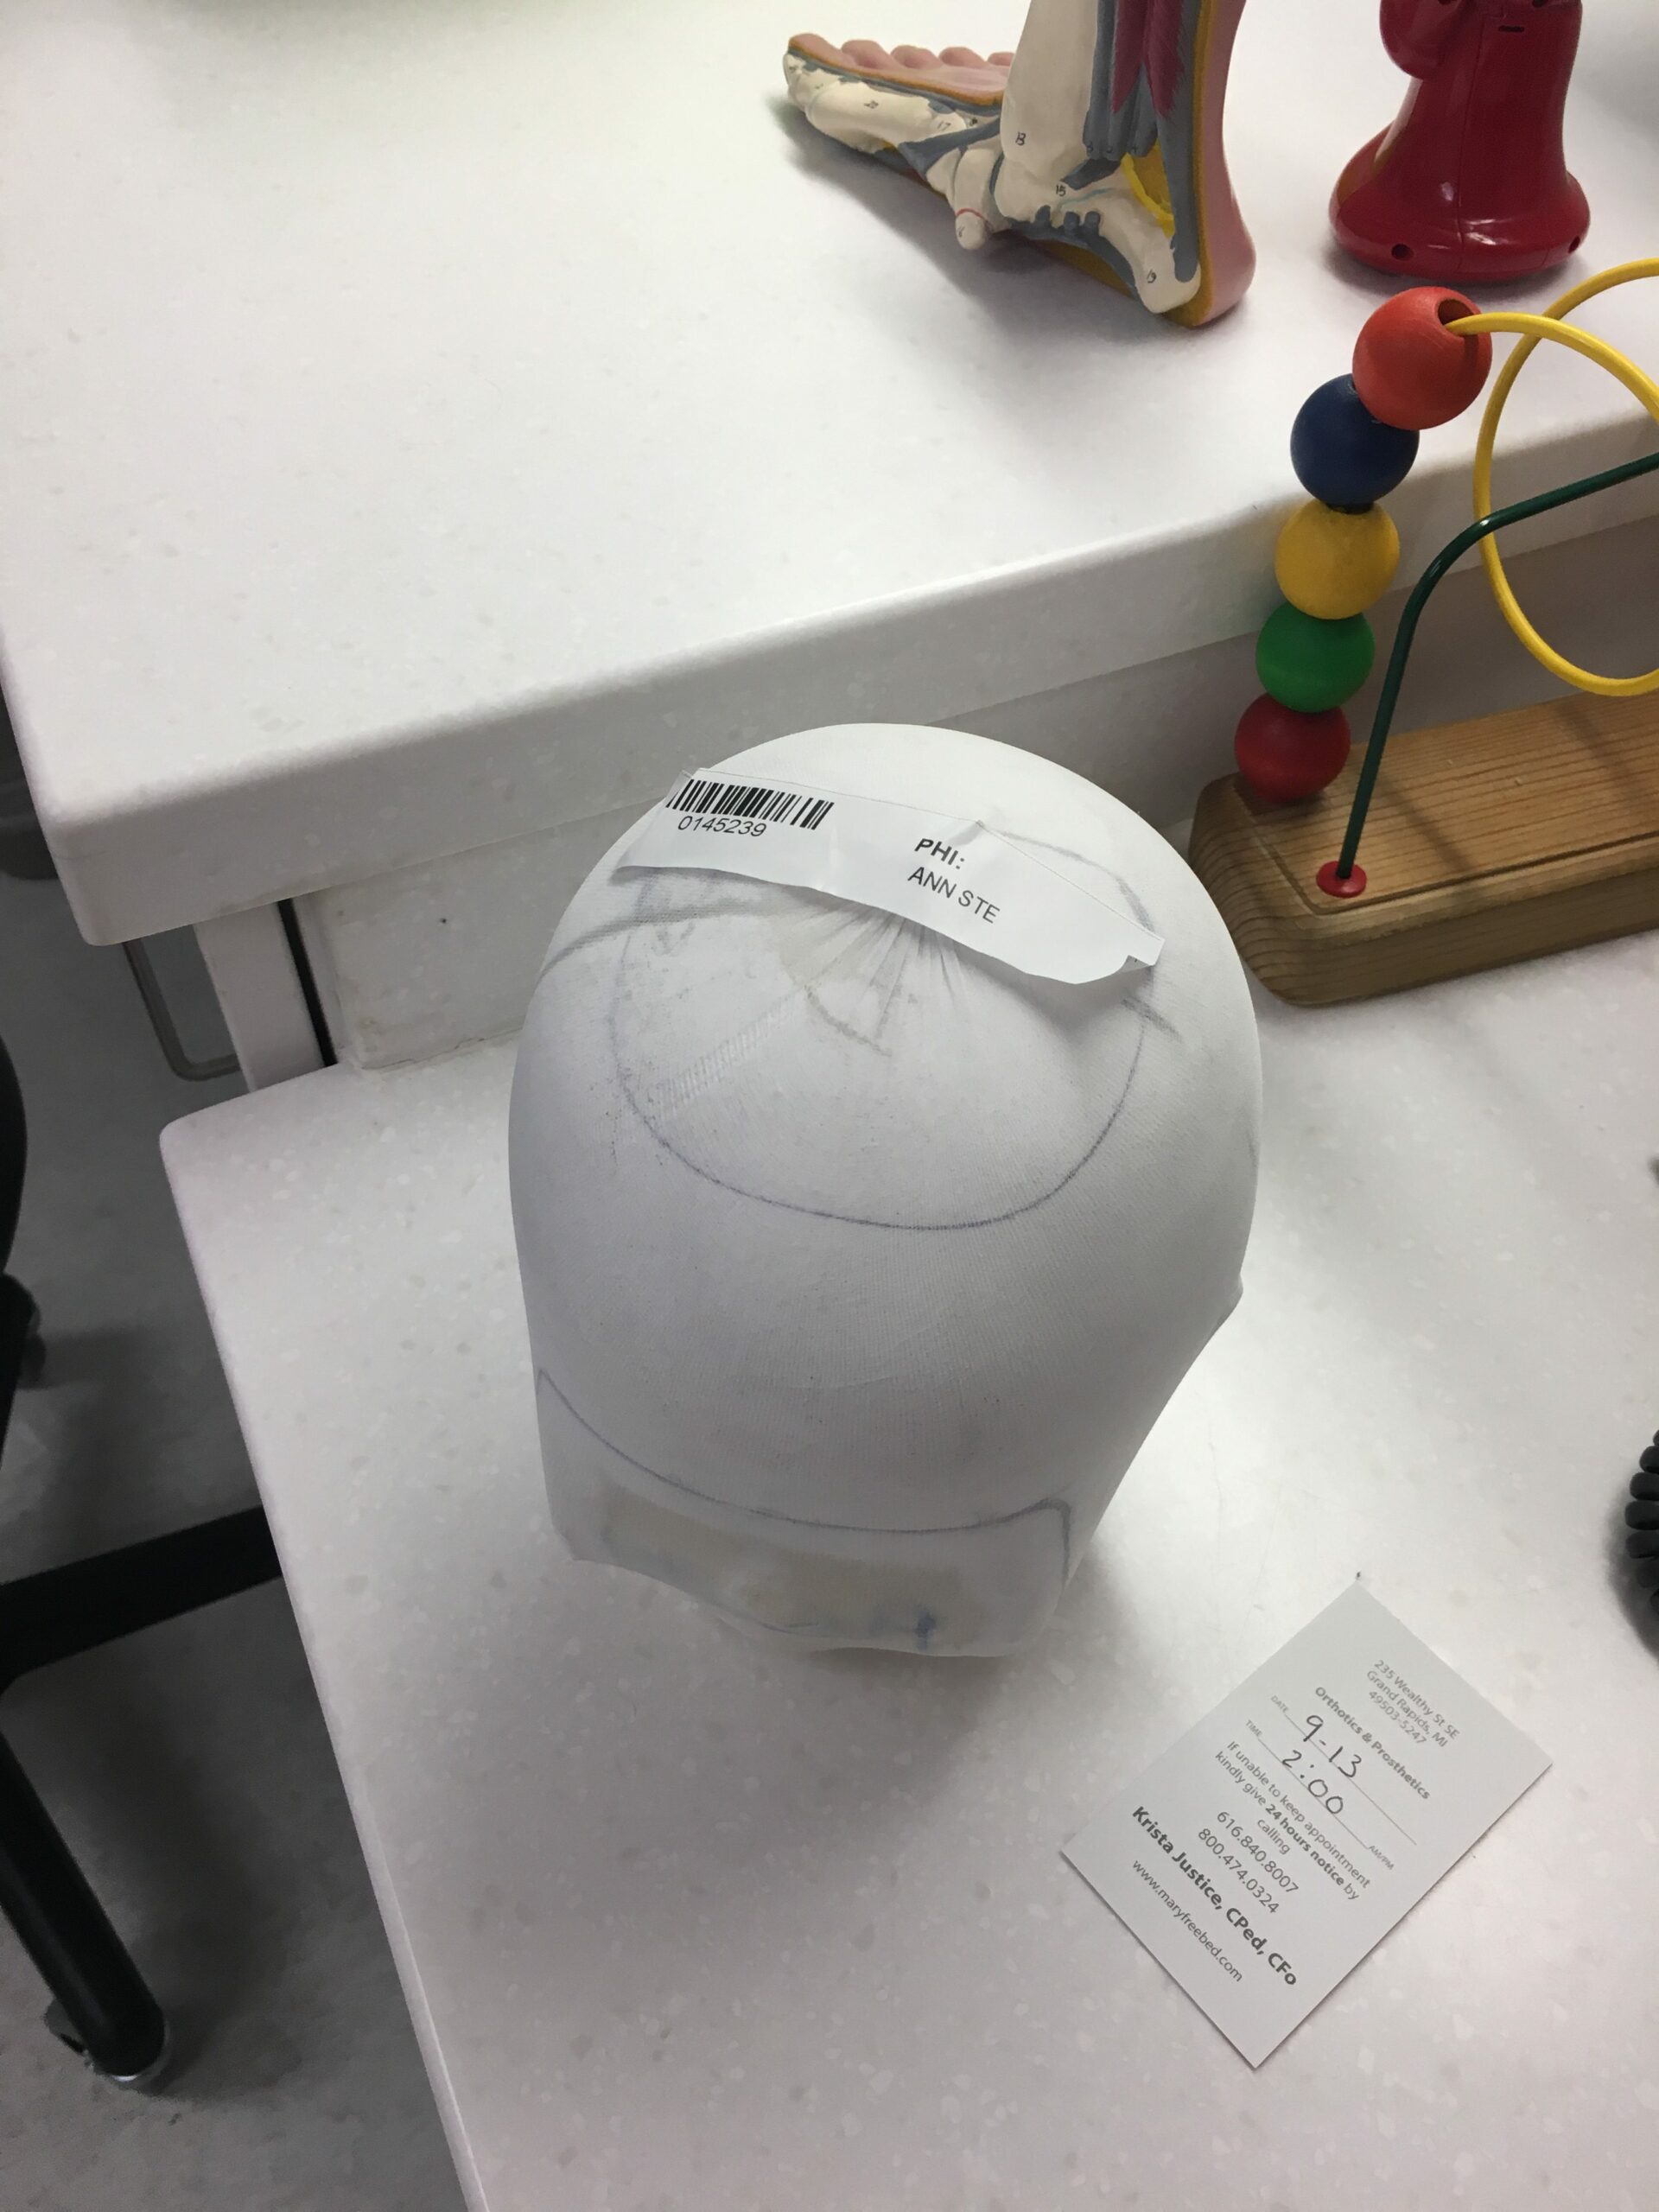 The computer-generated mold used to make Anneliese's custom helmet